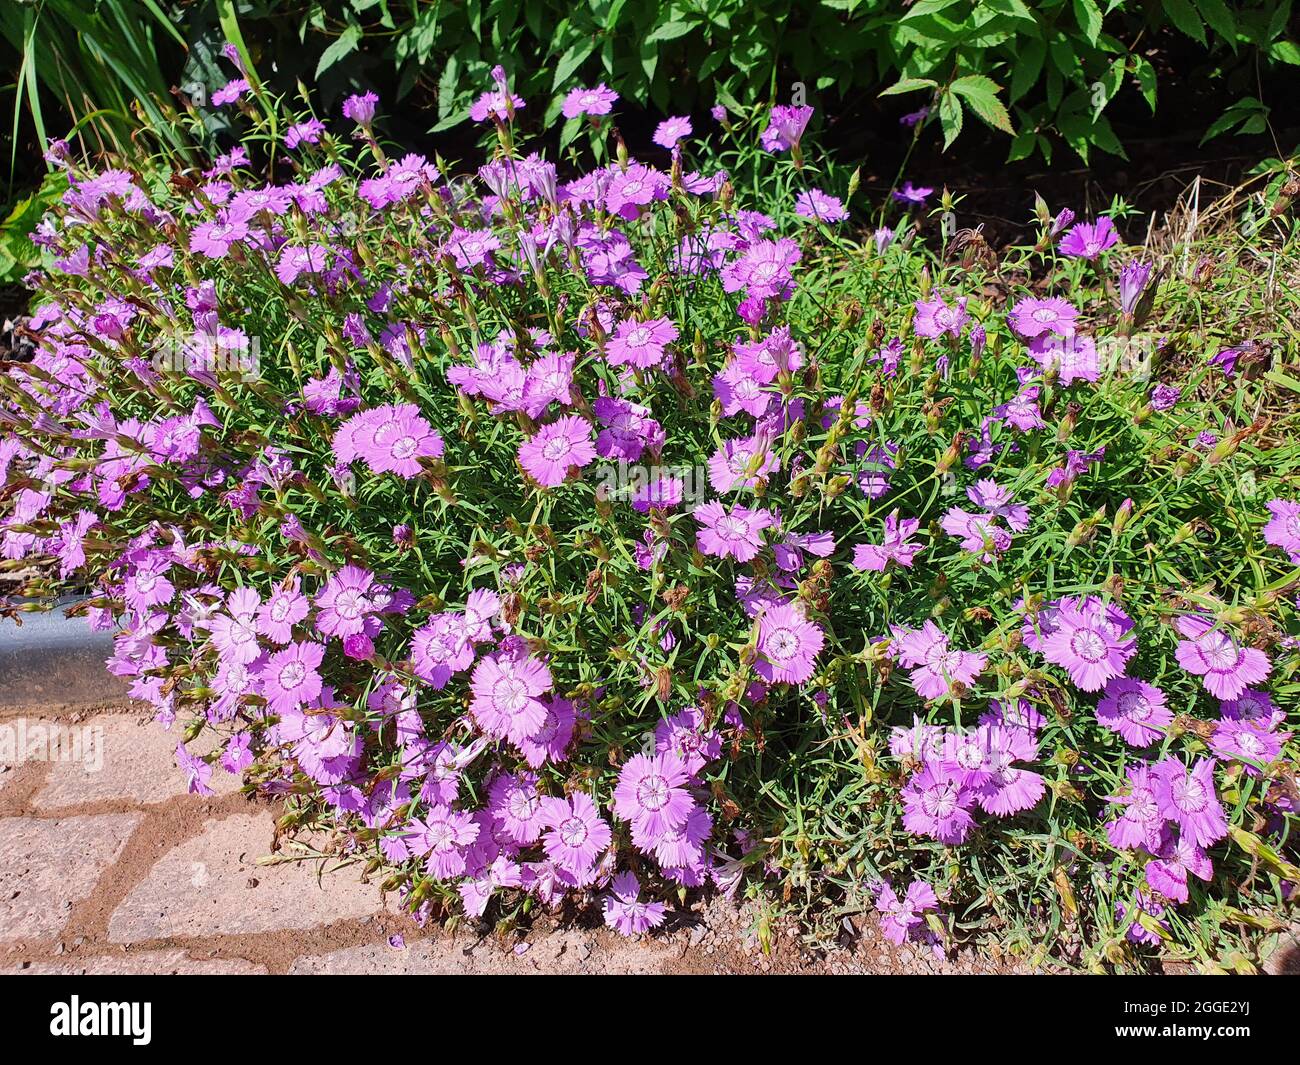 Dianthus Amurensis Siberian Blue A Summer Flowering Plant With A Light Purple Summertime